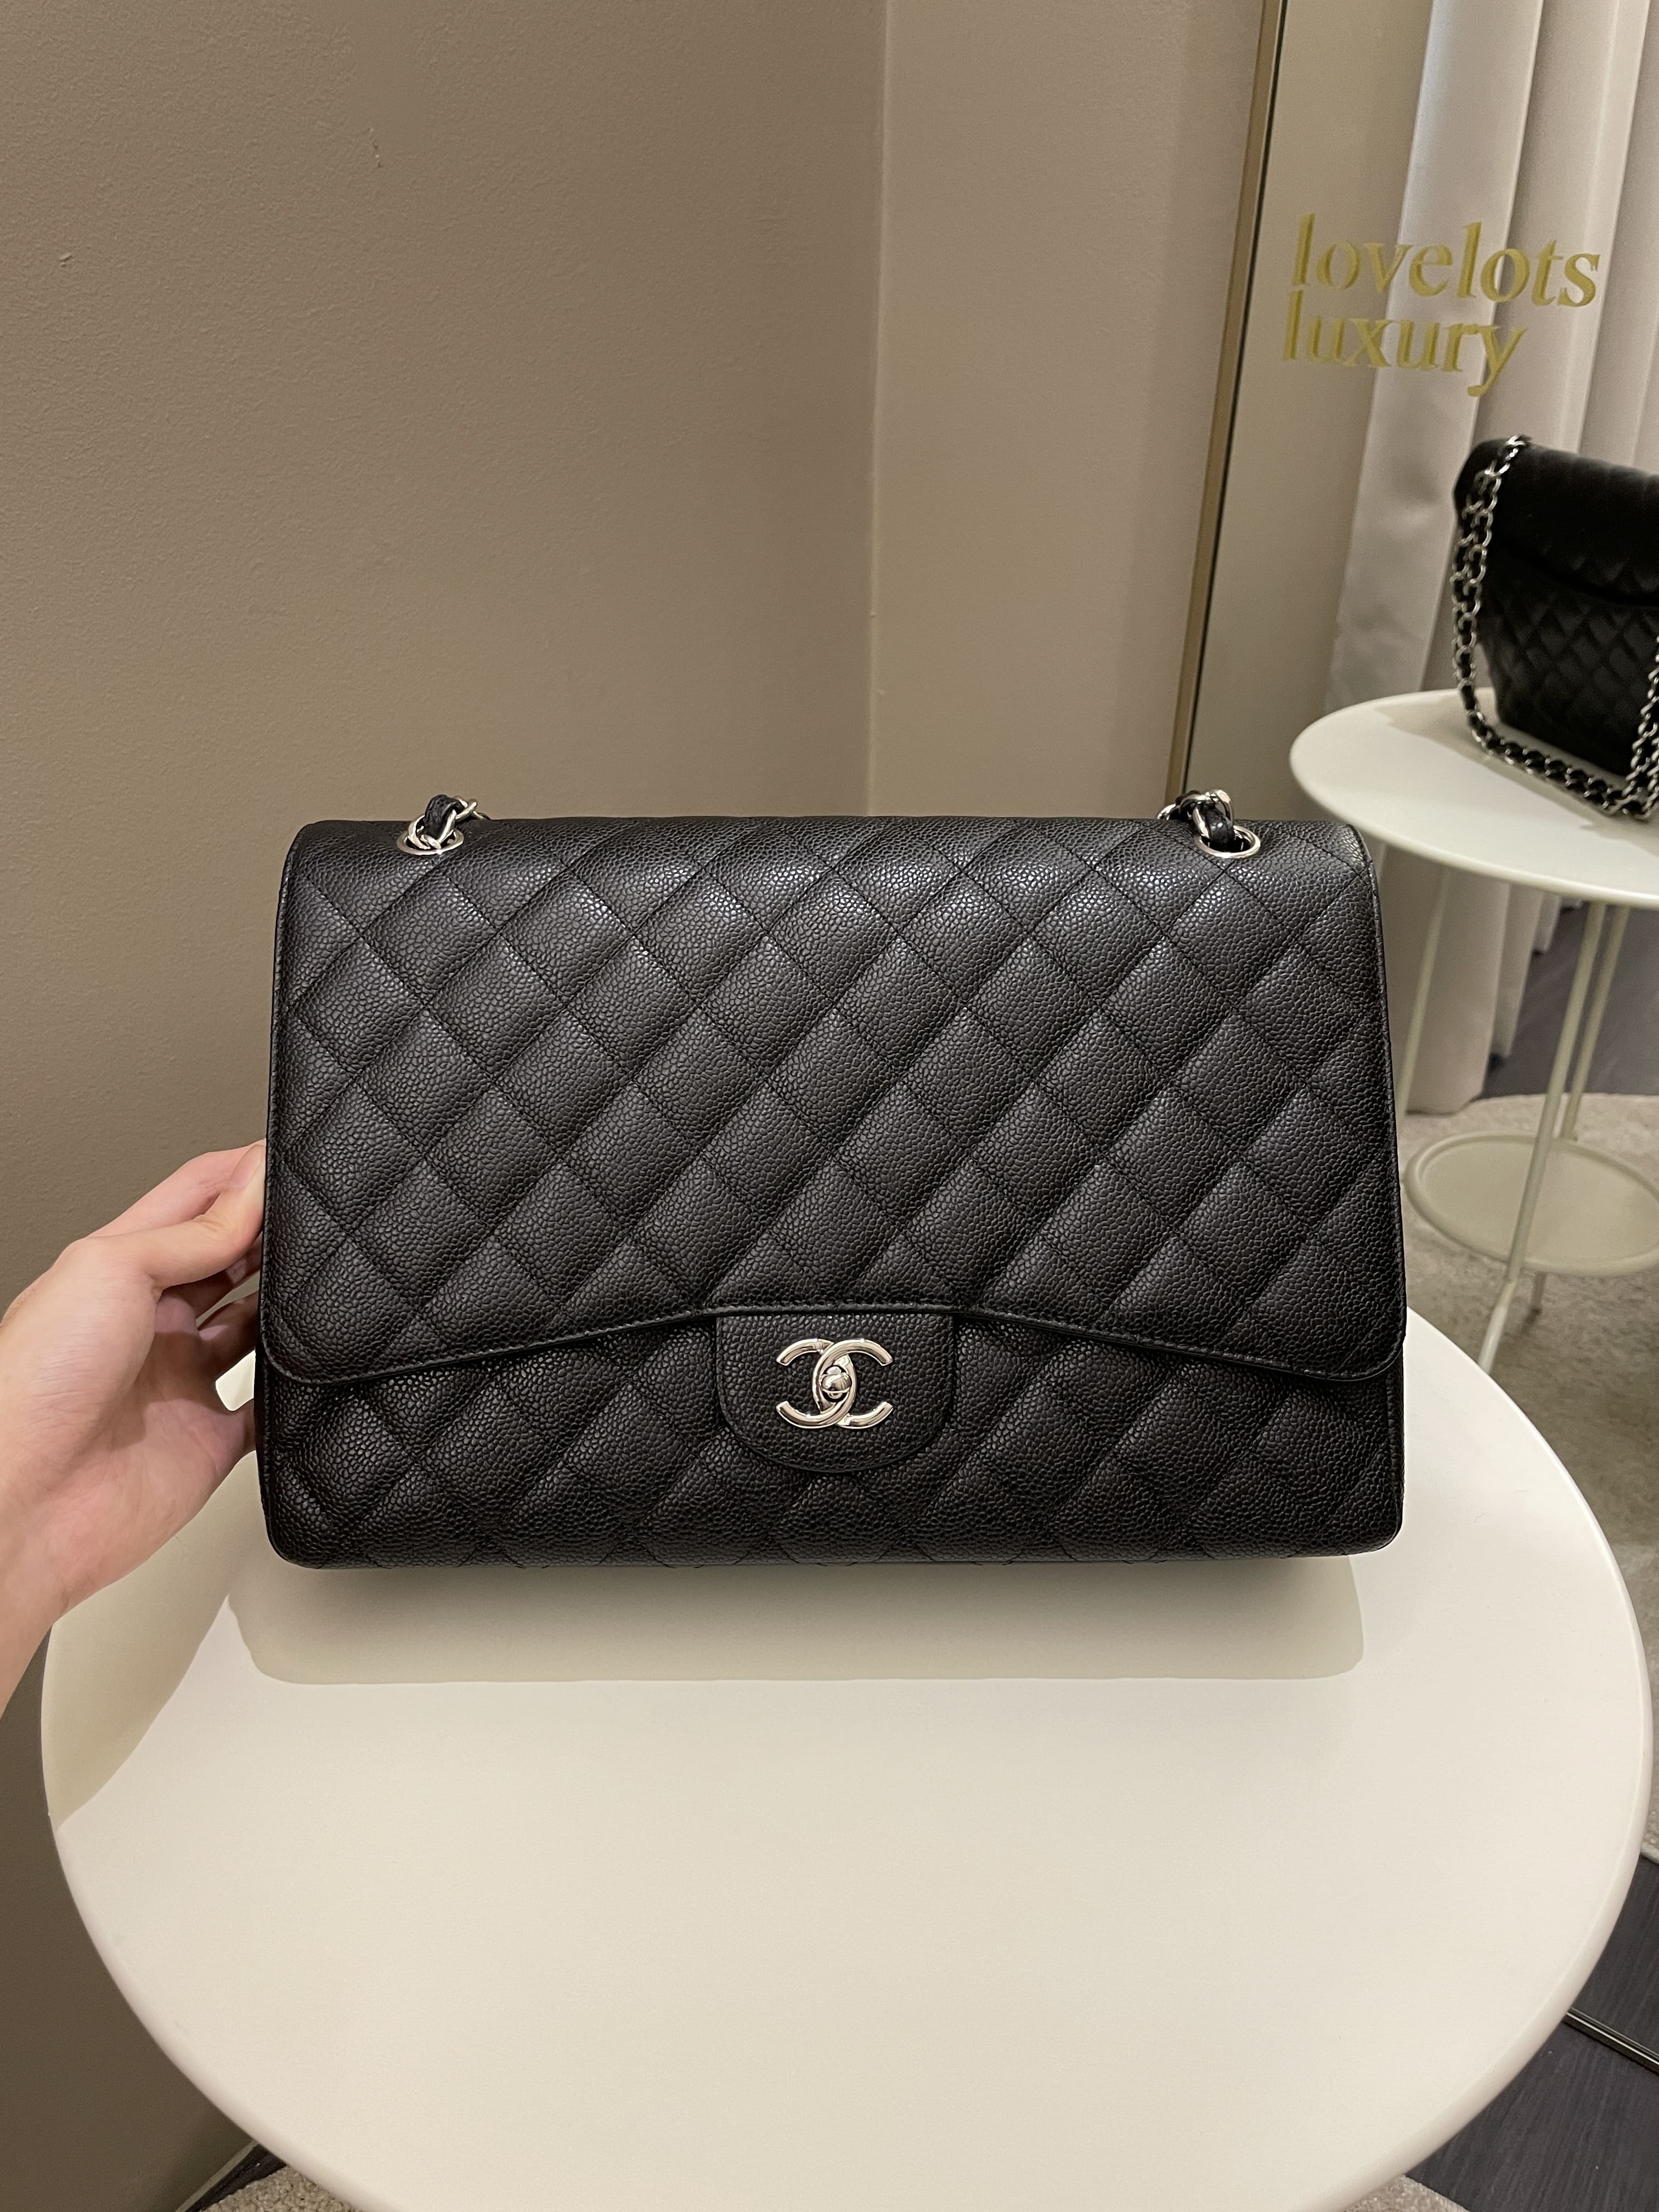 CHANEL Black Caviar Leather Classic Maxi Double Flap Bag Silver Hardwa -  The Purse Ladies